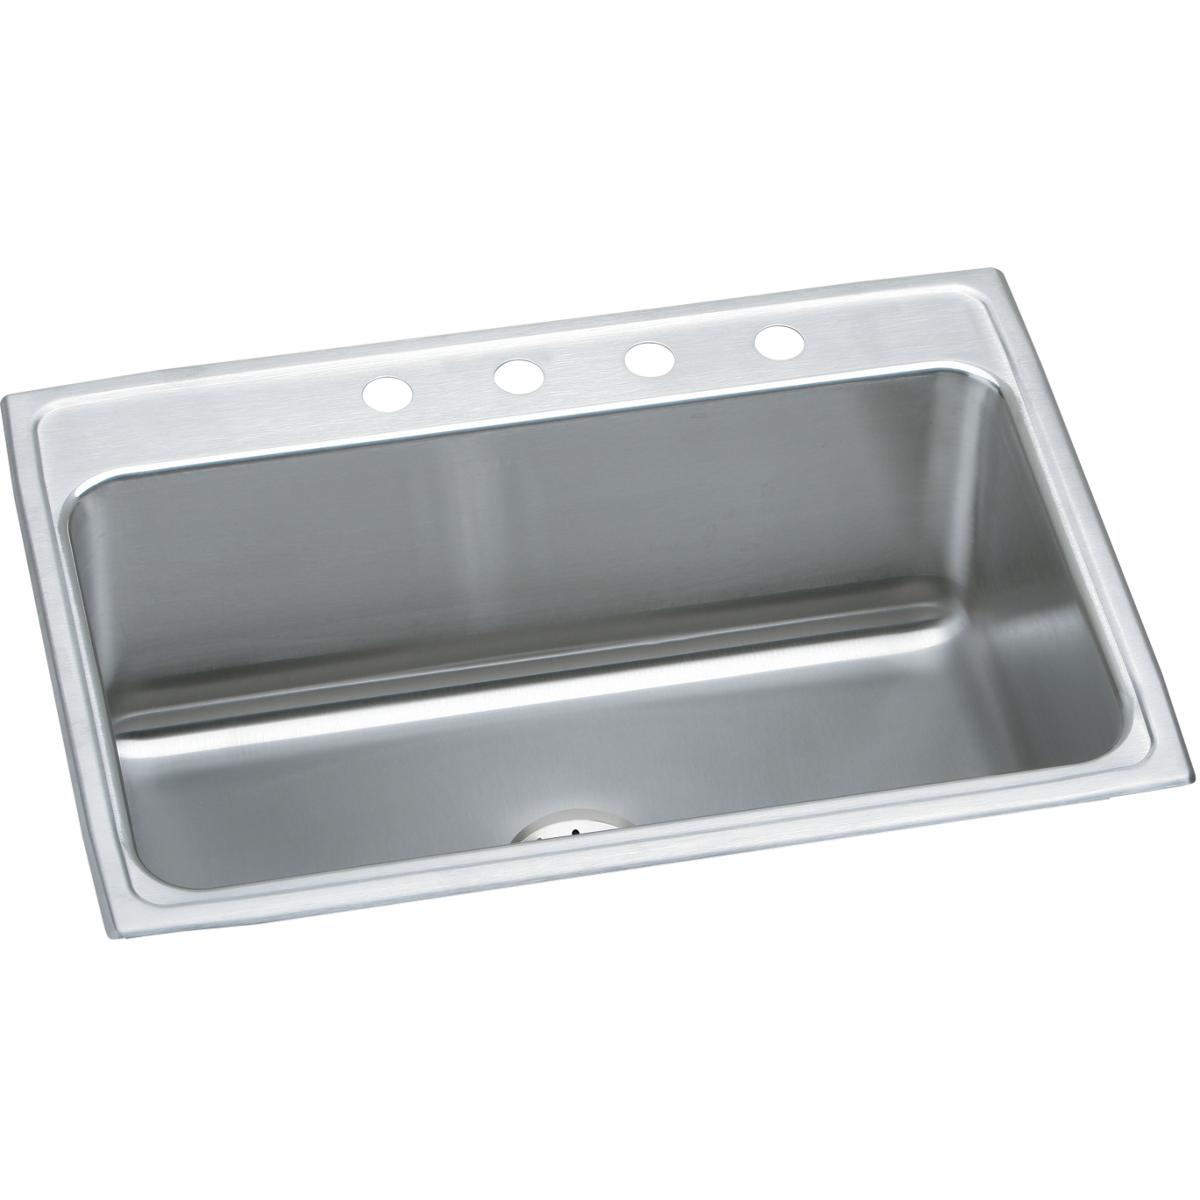 Elkay Lustertone Classic 31" x 22" x 10-1/8" Single Bowl Stainless Steel Drop-in Sink with Perfect Drain